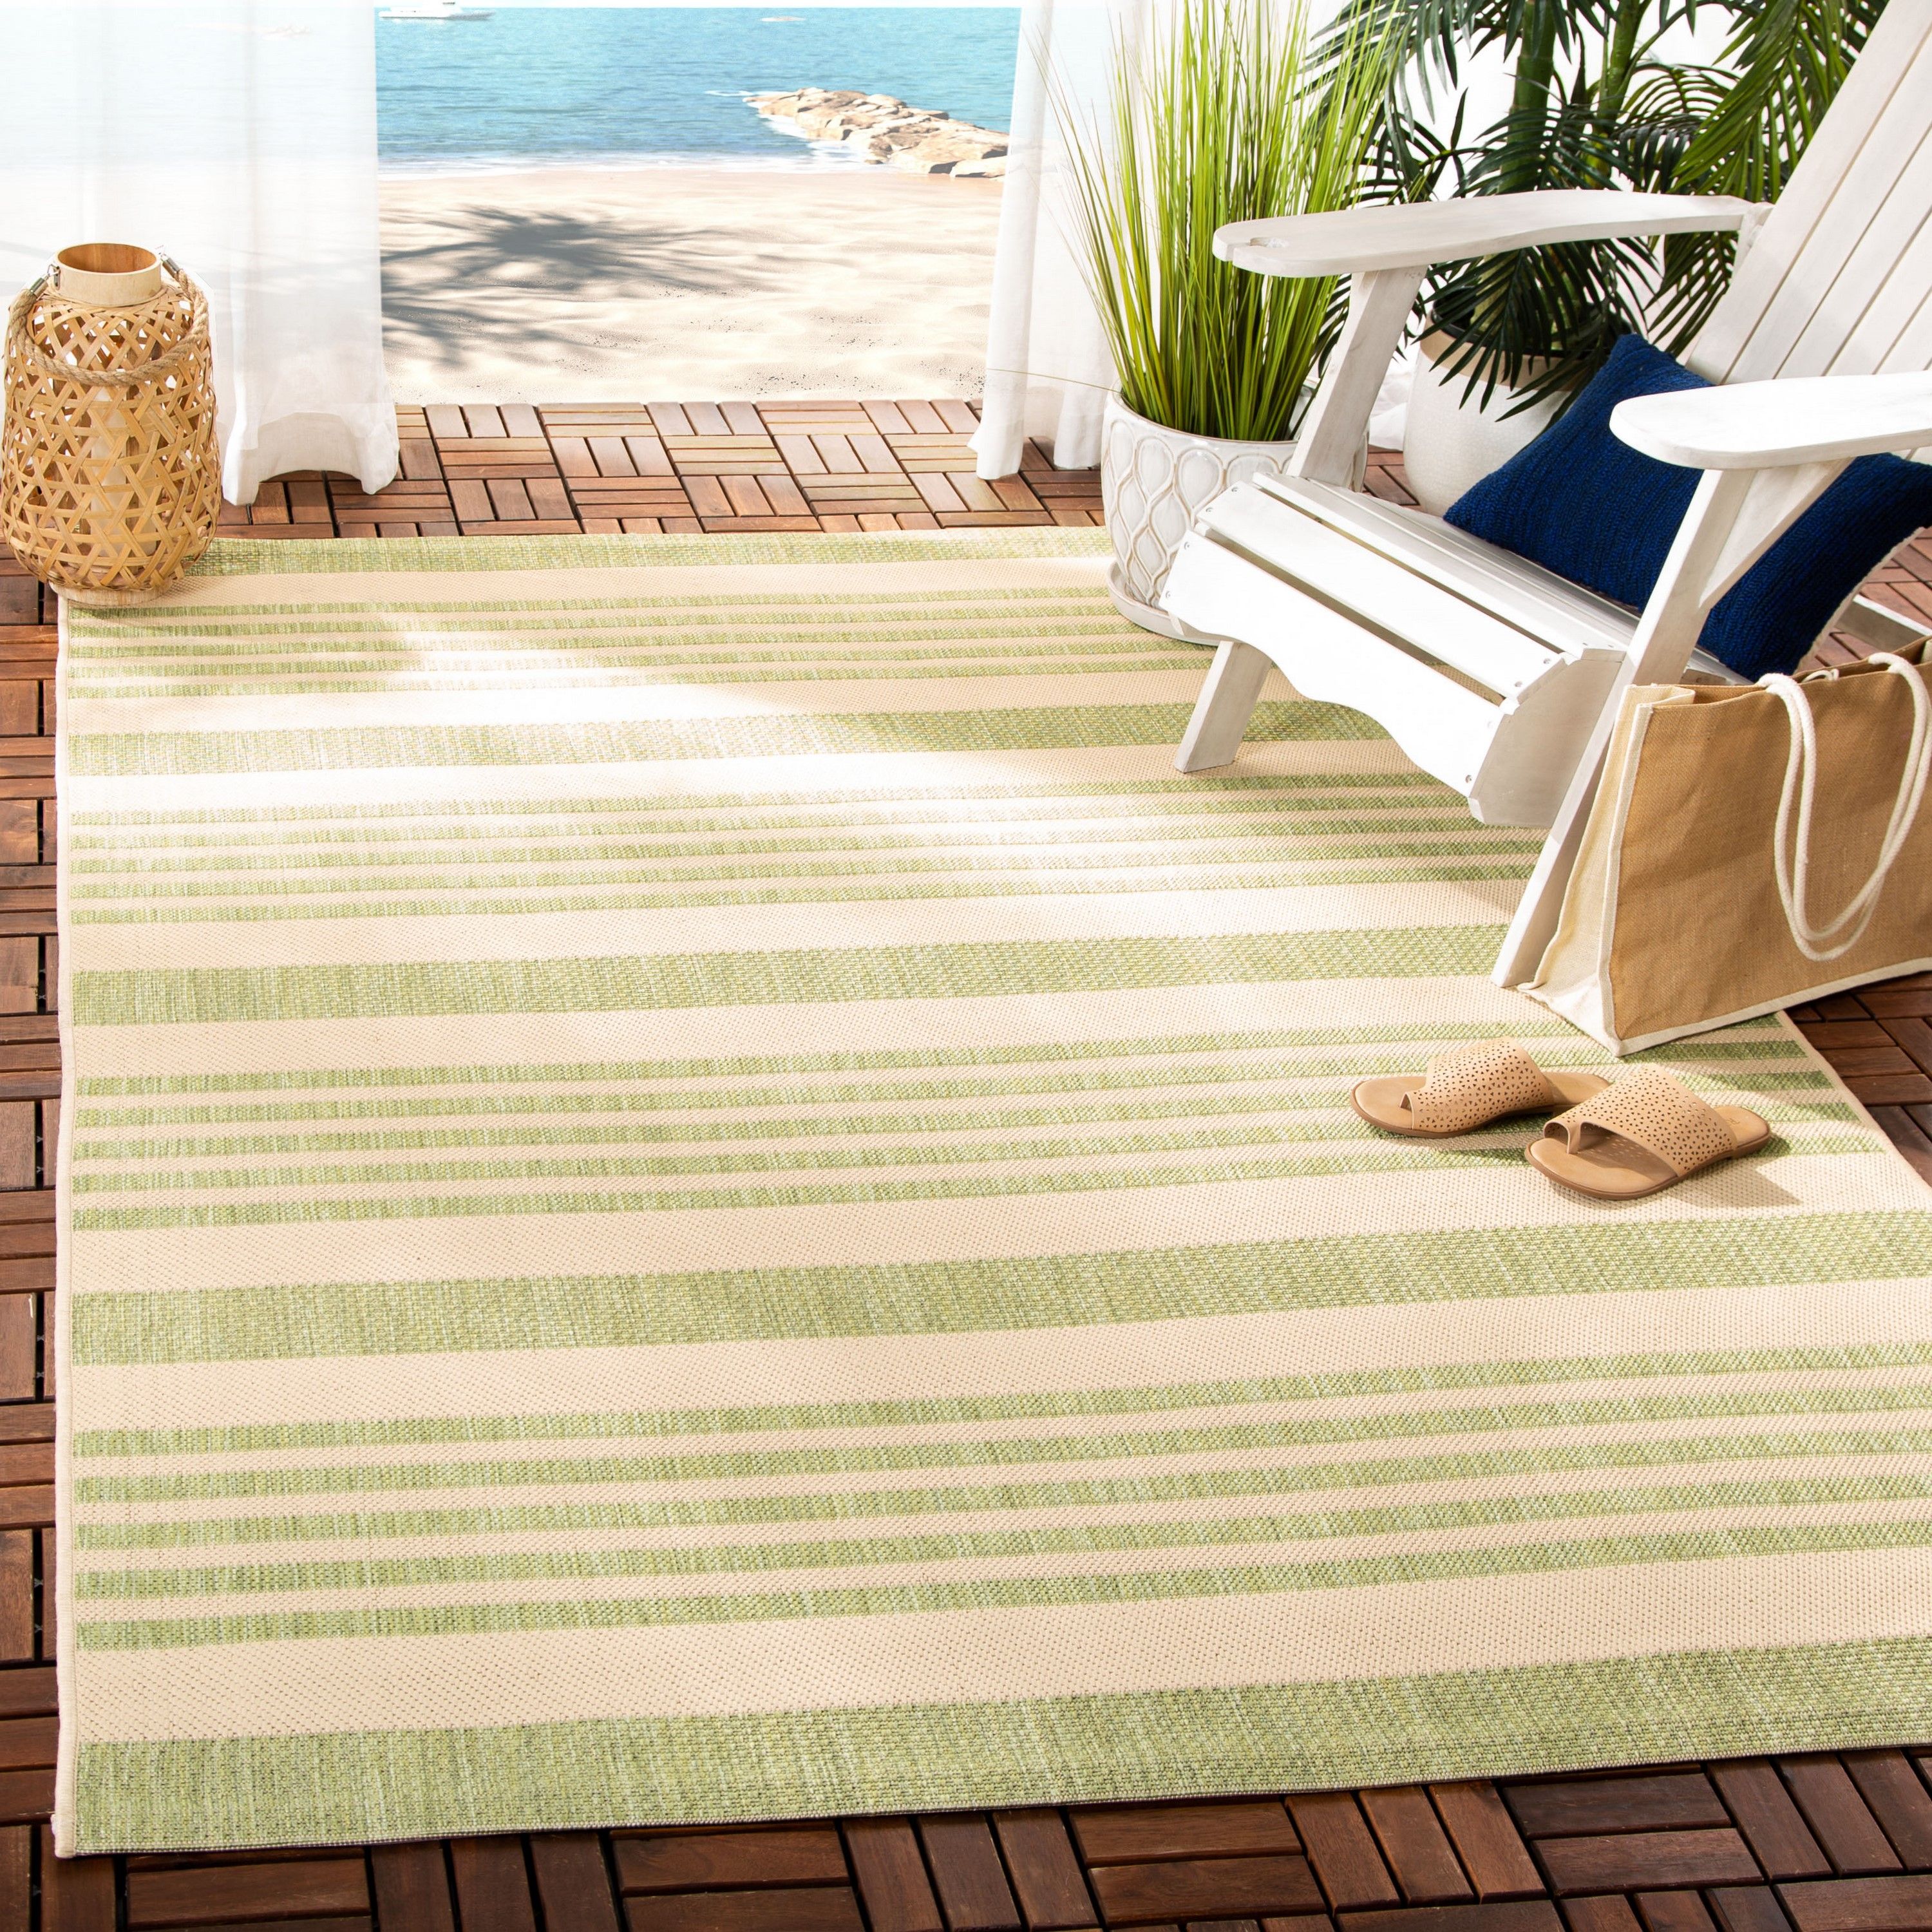 Safavieh Courtyard Dobby 5 X 5 Beige/Sweet Pea Square Indoor/Outdoor Stripe  Coastal Area Rug In The Rugs Department At Lowes With Coastal Square Rugs (View 14 of 15)